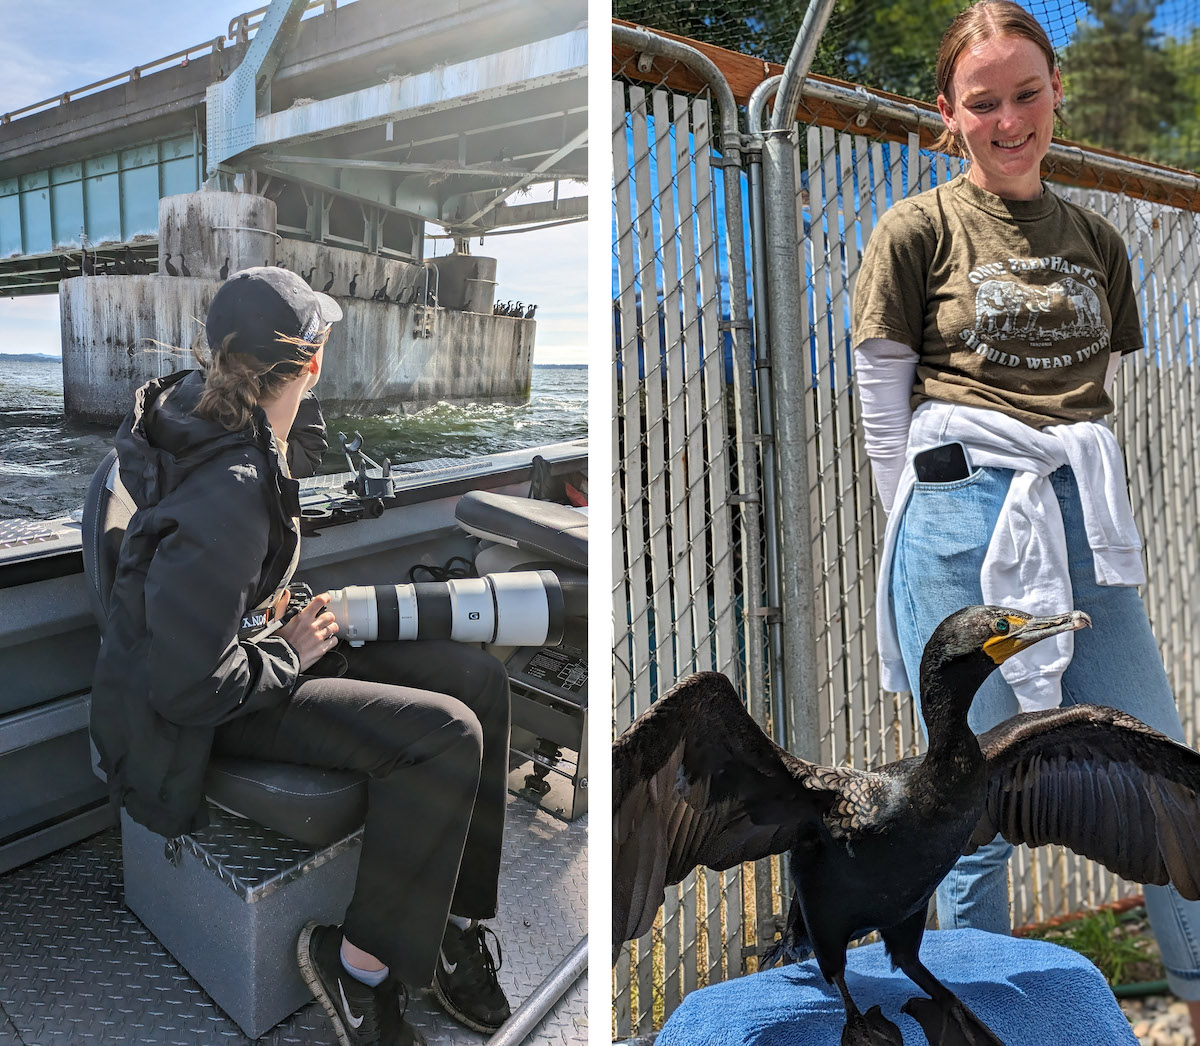 Left image: a woman holding a camera with a telephoto lens is on a boat looking towards part of a bridge, which has many cormorants perched on a ledge. Right image: a cormorant shows off its wings on an artificial blue rock while a woman in her 20s smiles behind in admiration.